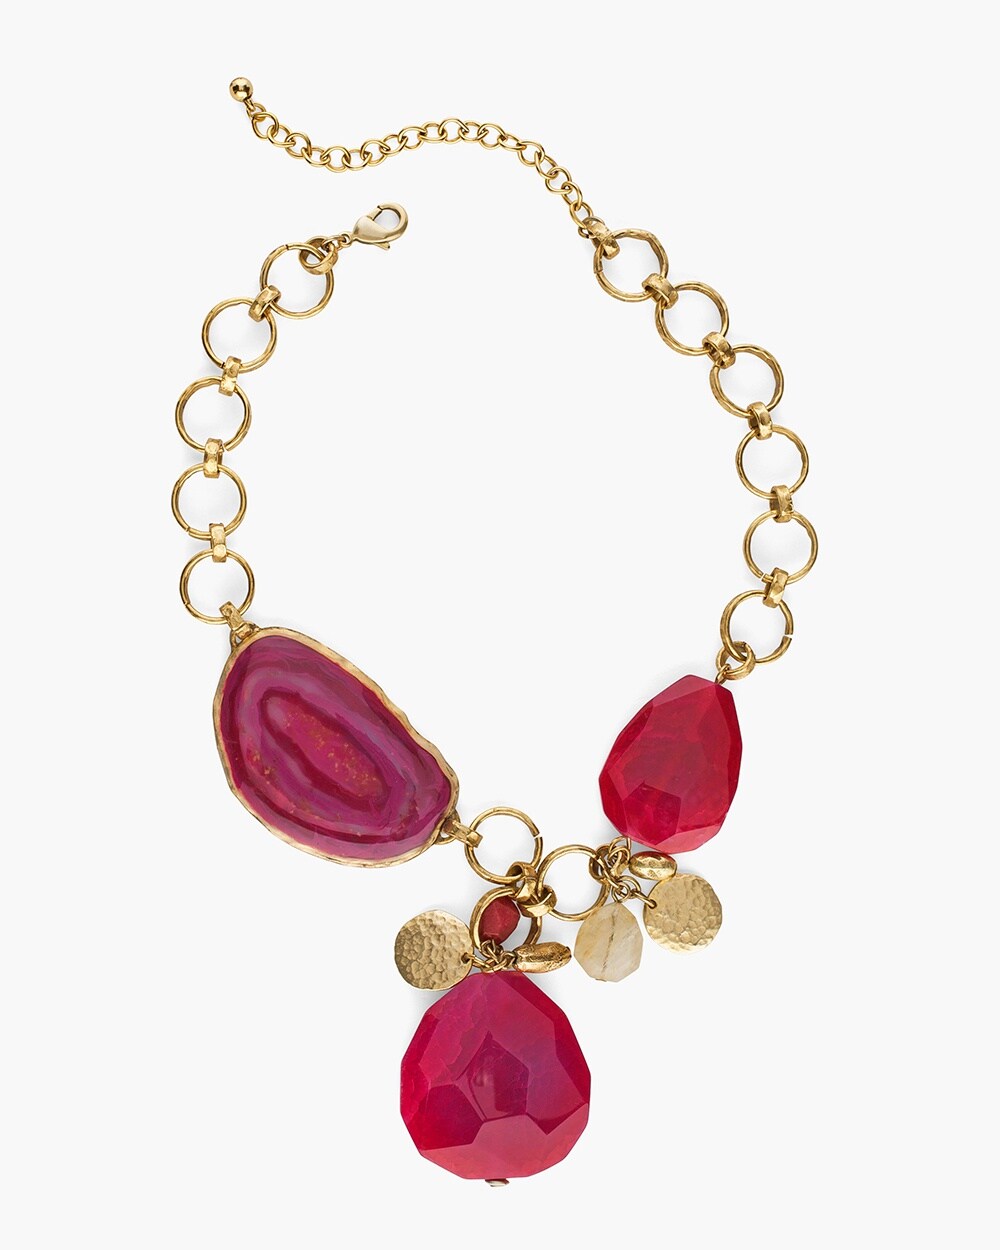 Gold-Tone and Pink Stone Bib Necklace